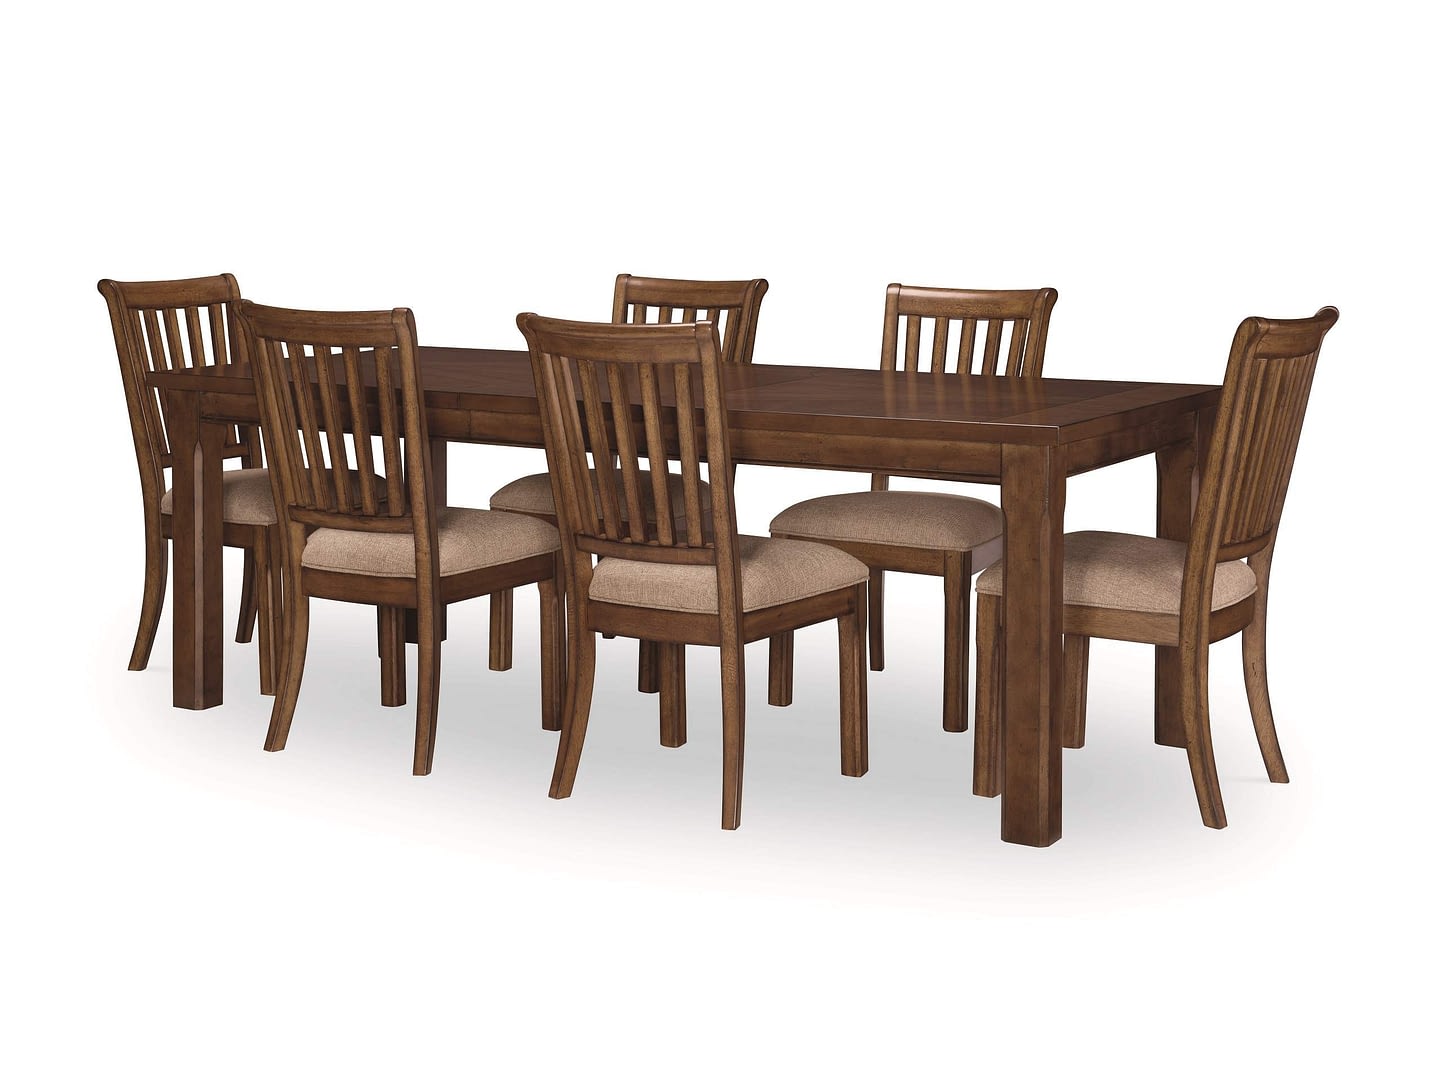 OXFORD 6-Seat Dining Set - Zoom